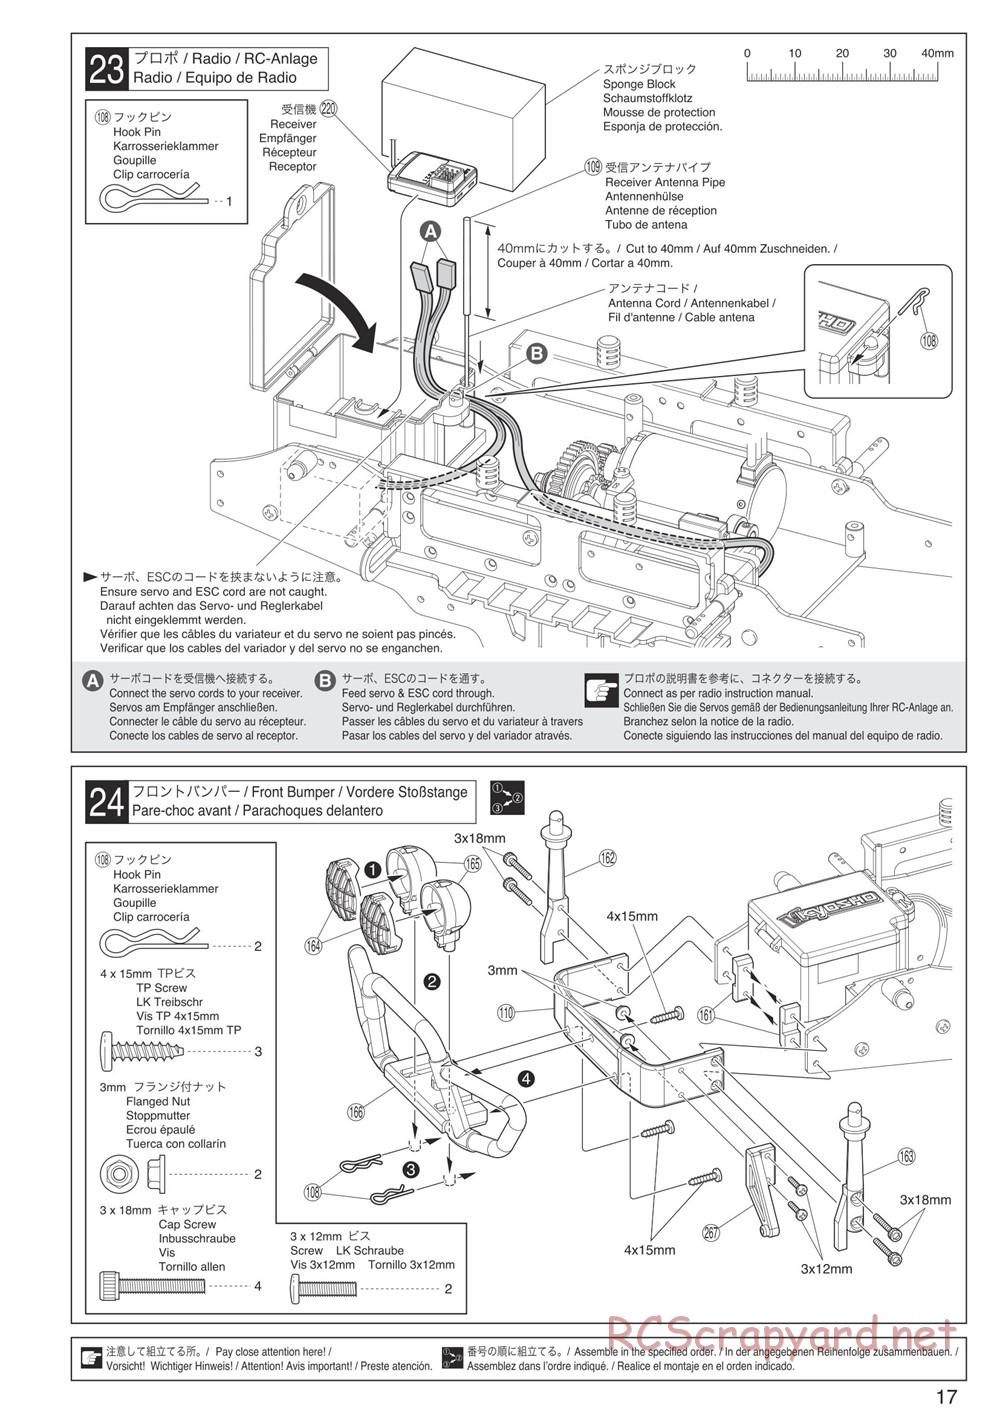 Kyosho - FO-XX VE 2.0 - Manual - Page 17